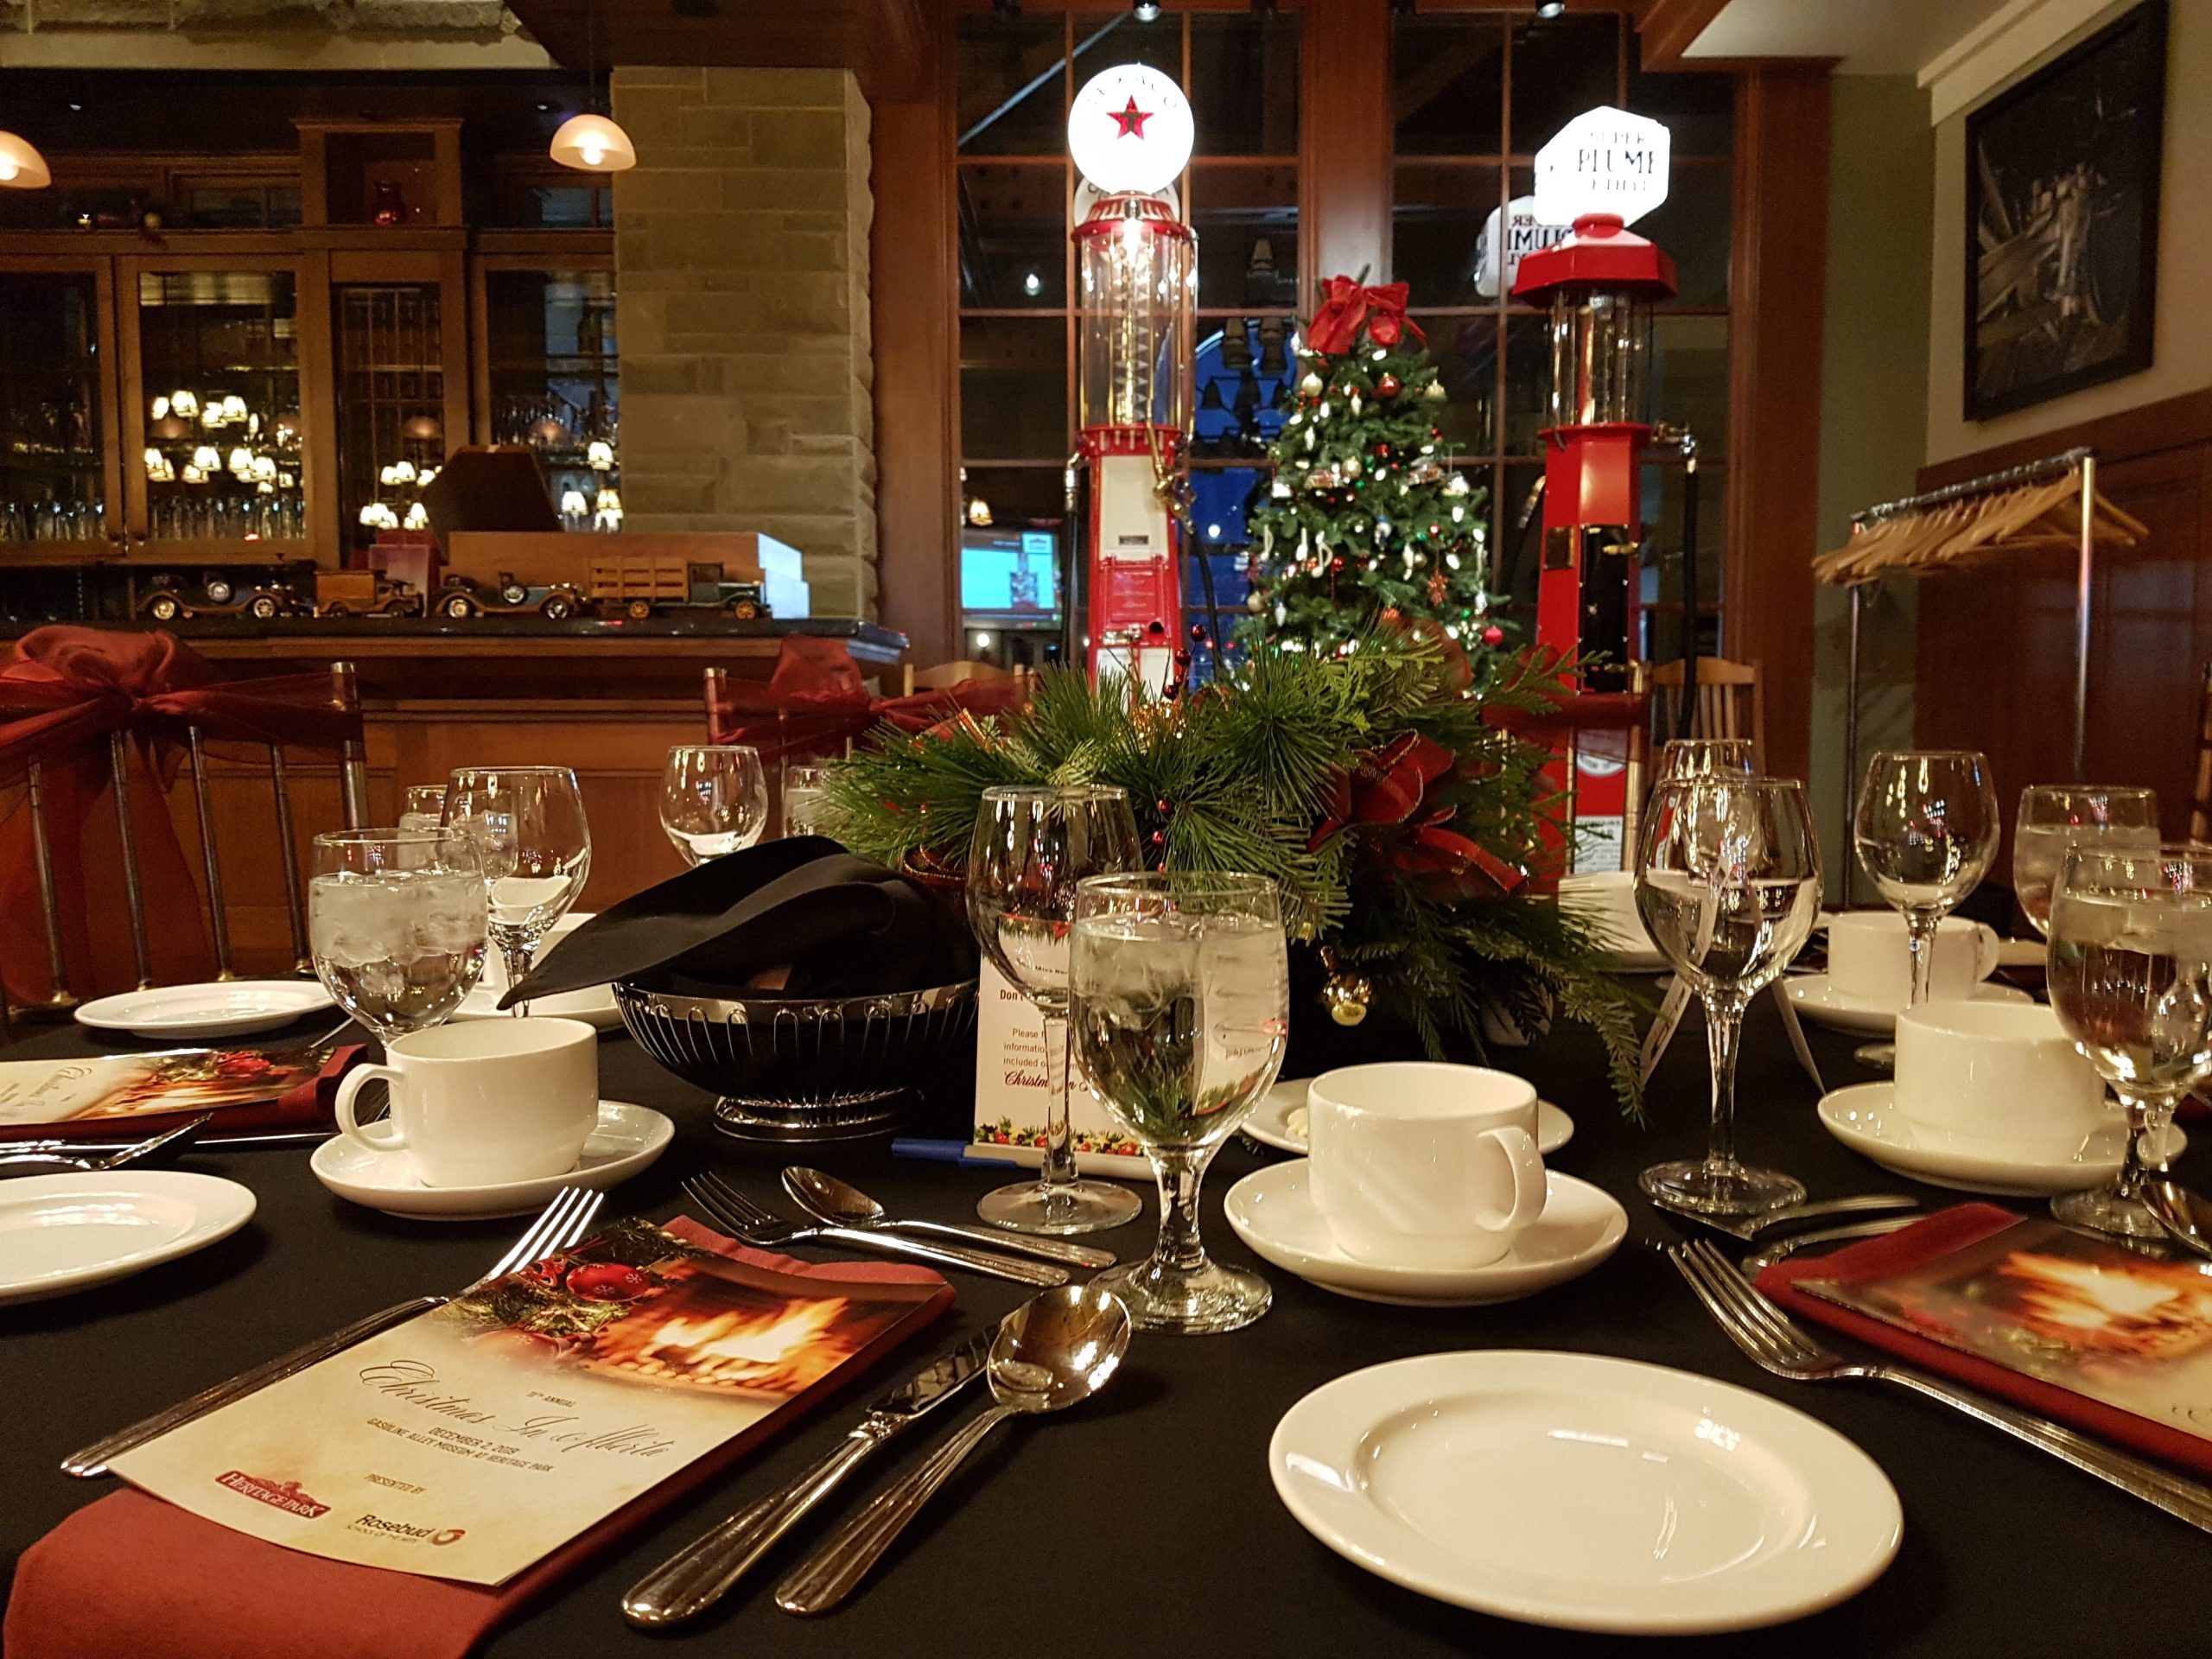 Sit-Down Christmas Dinner setting at Calgary’s Heritage Park with Festive Centerpiece